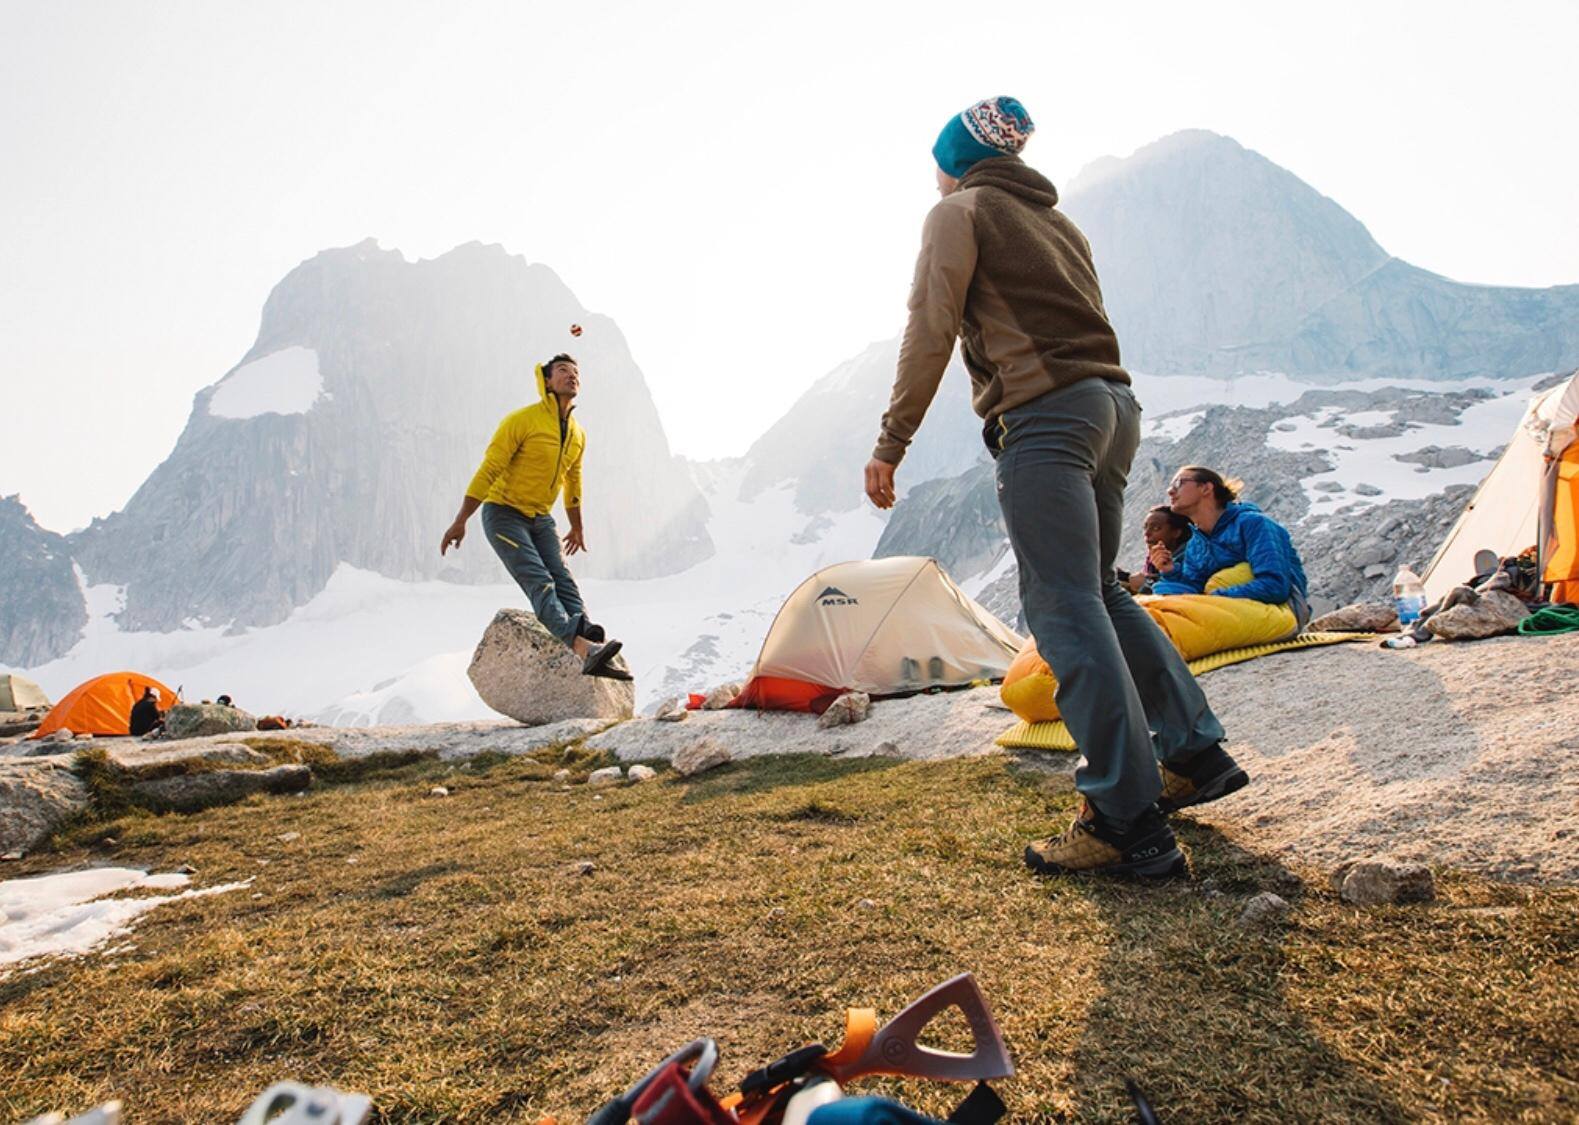 men playing hackey sack, top of mountain with tents